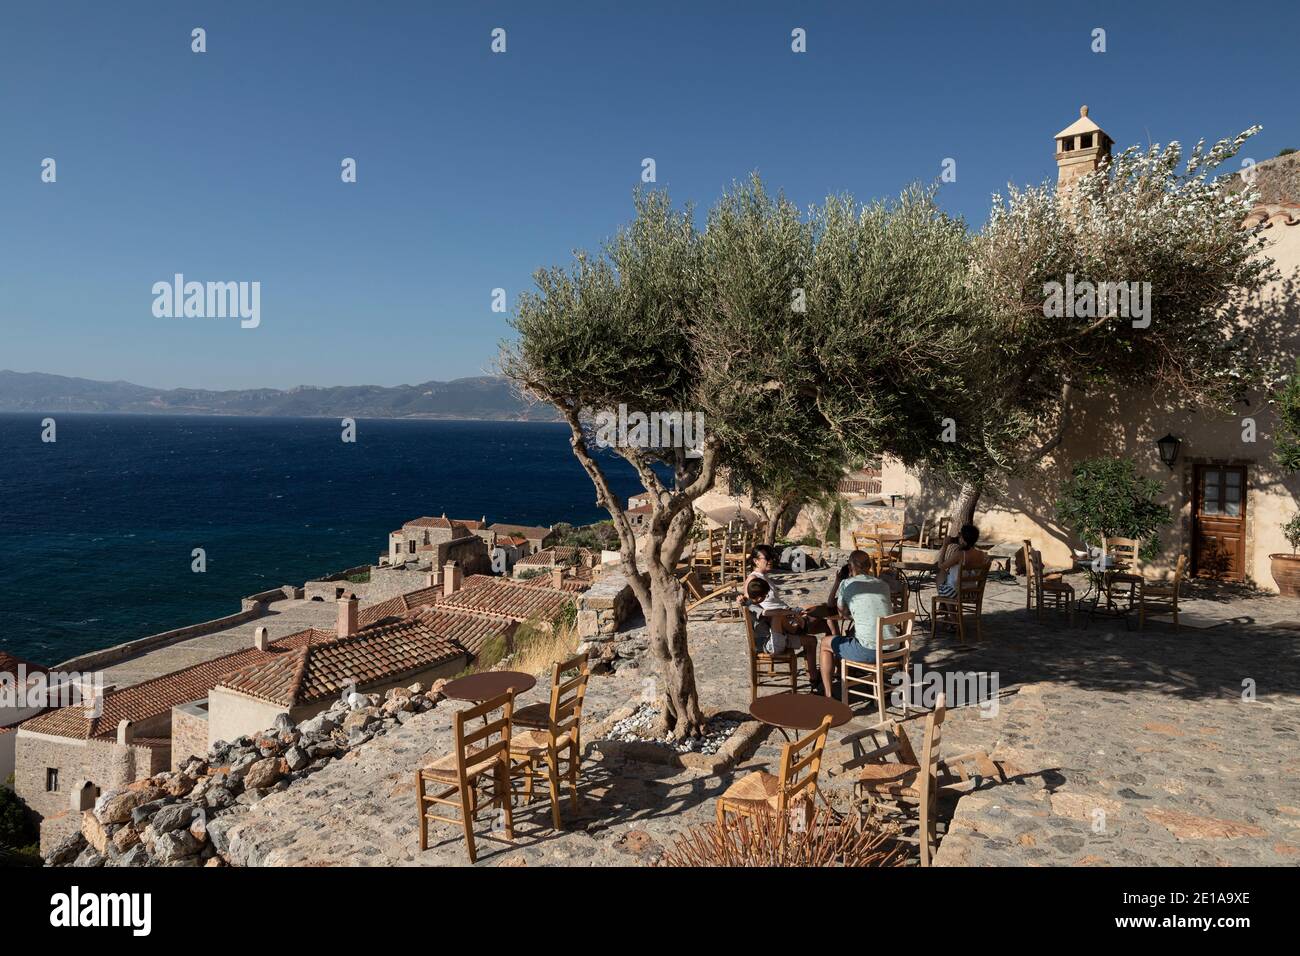 A tourist family enjoy their breakfast at a coffee shop in the castle city of Monemvasia island, Peloponnese region, Greece on July 29, 2020. / Τουρίσ Stock Photo